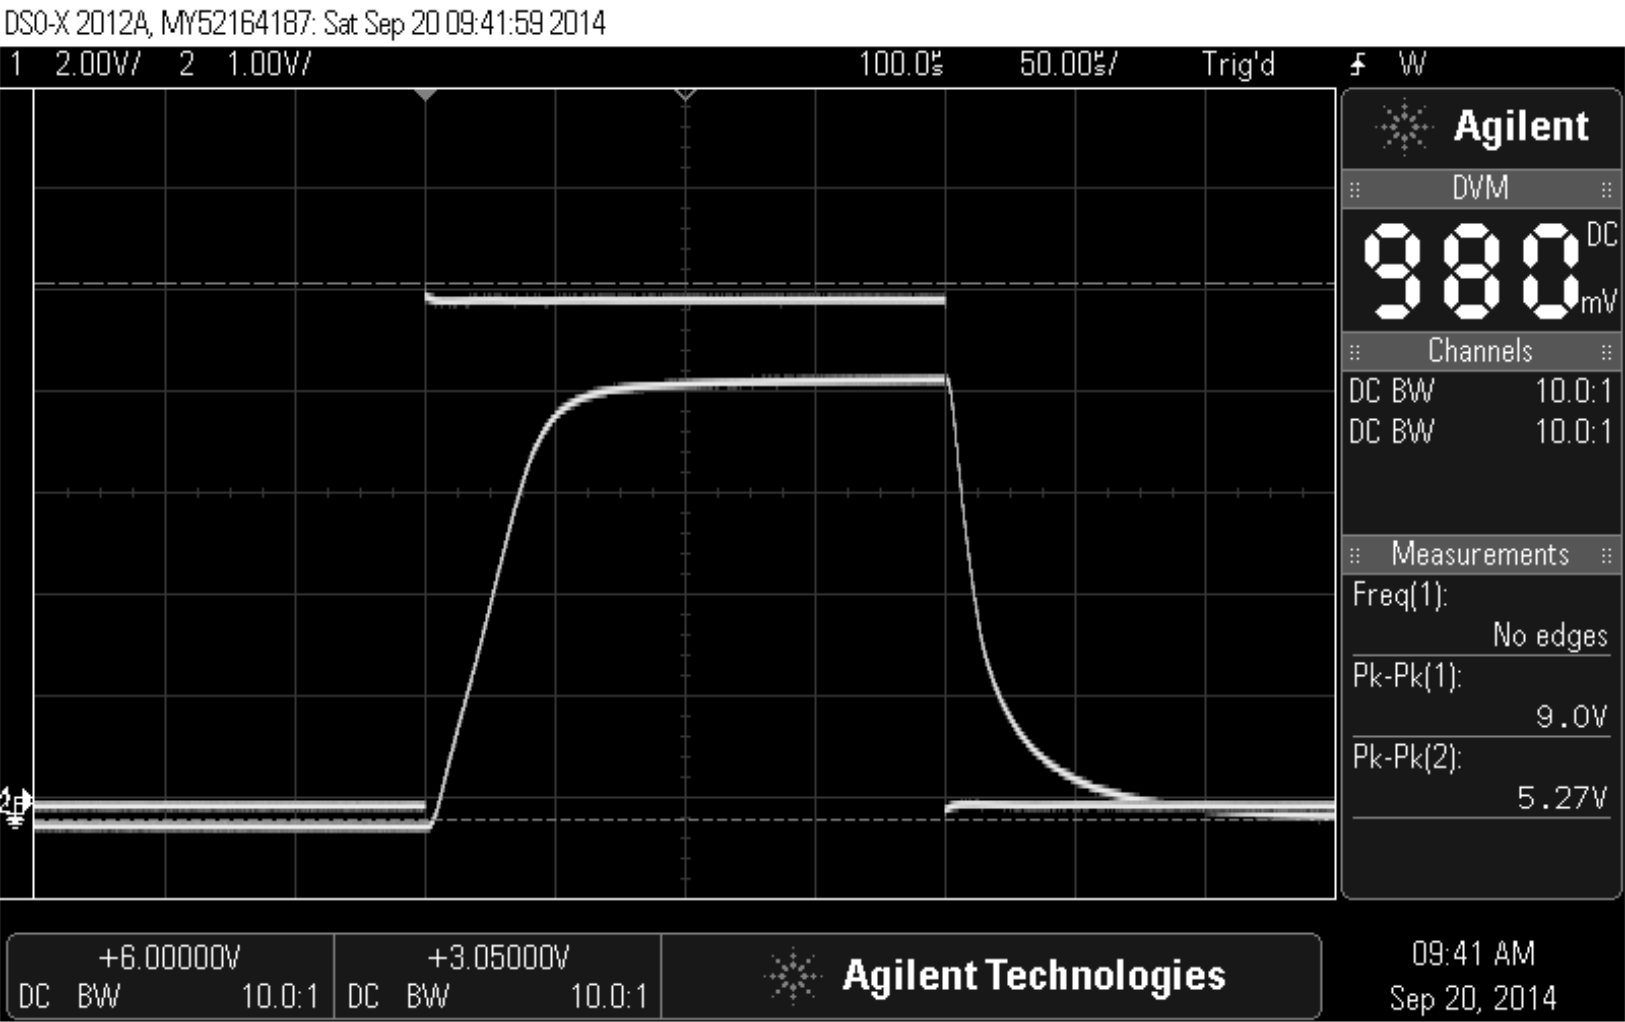 Oscilloscope capture showing a 50 microsecond envelope response